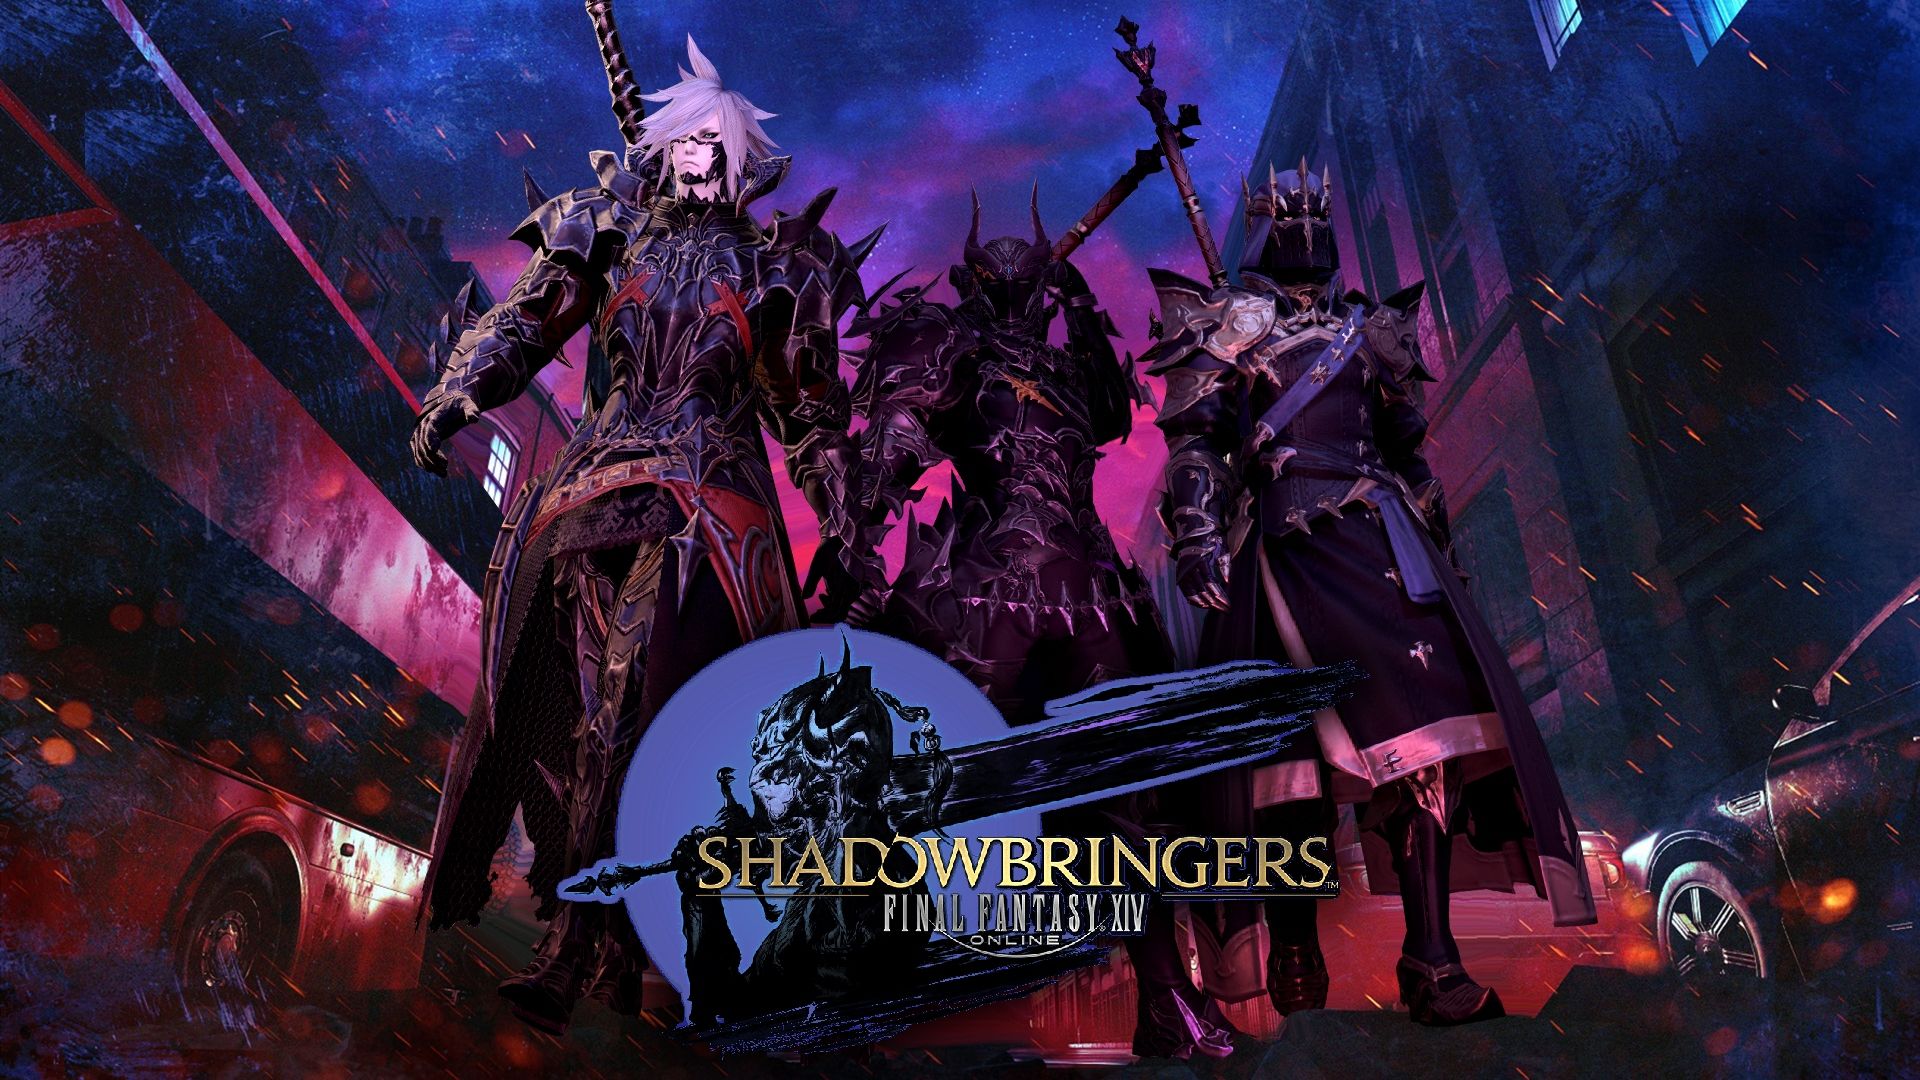 Ffxiv Shadowbringers Wallpaper Awesome where Were You when Square